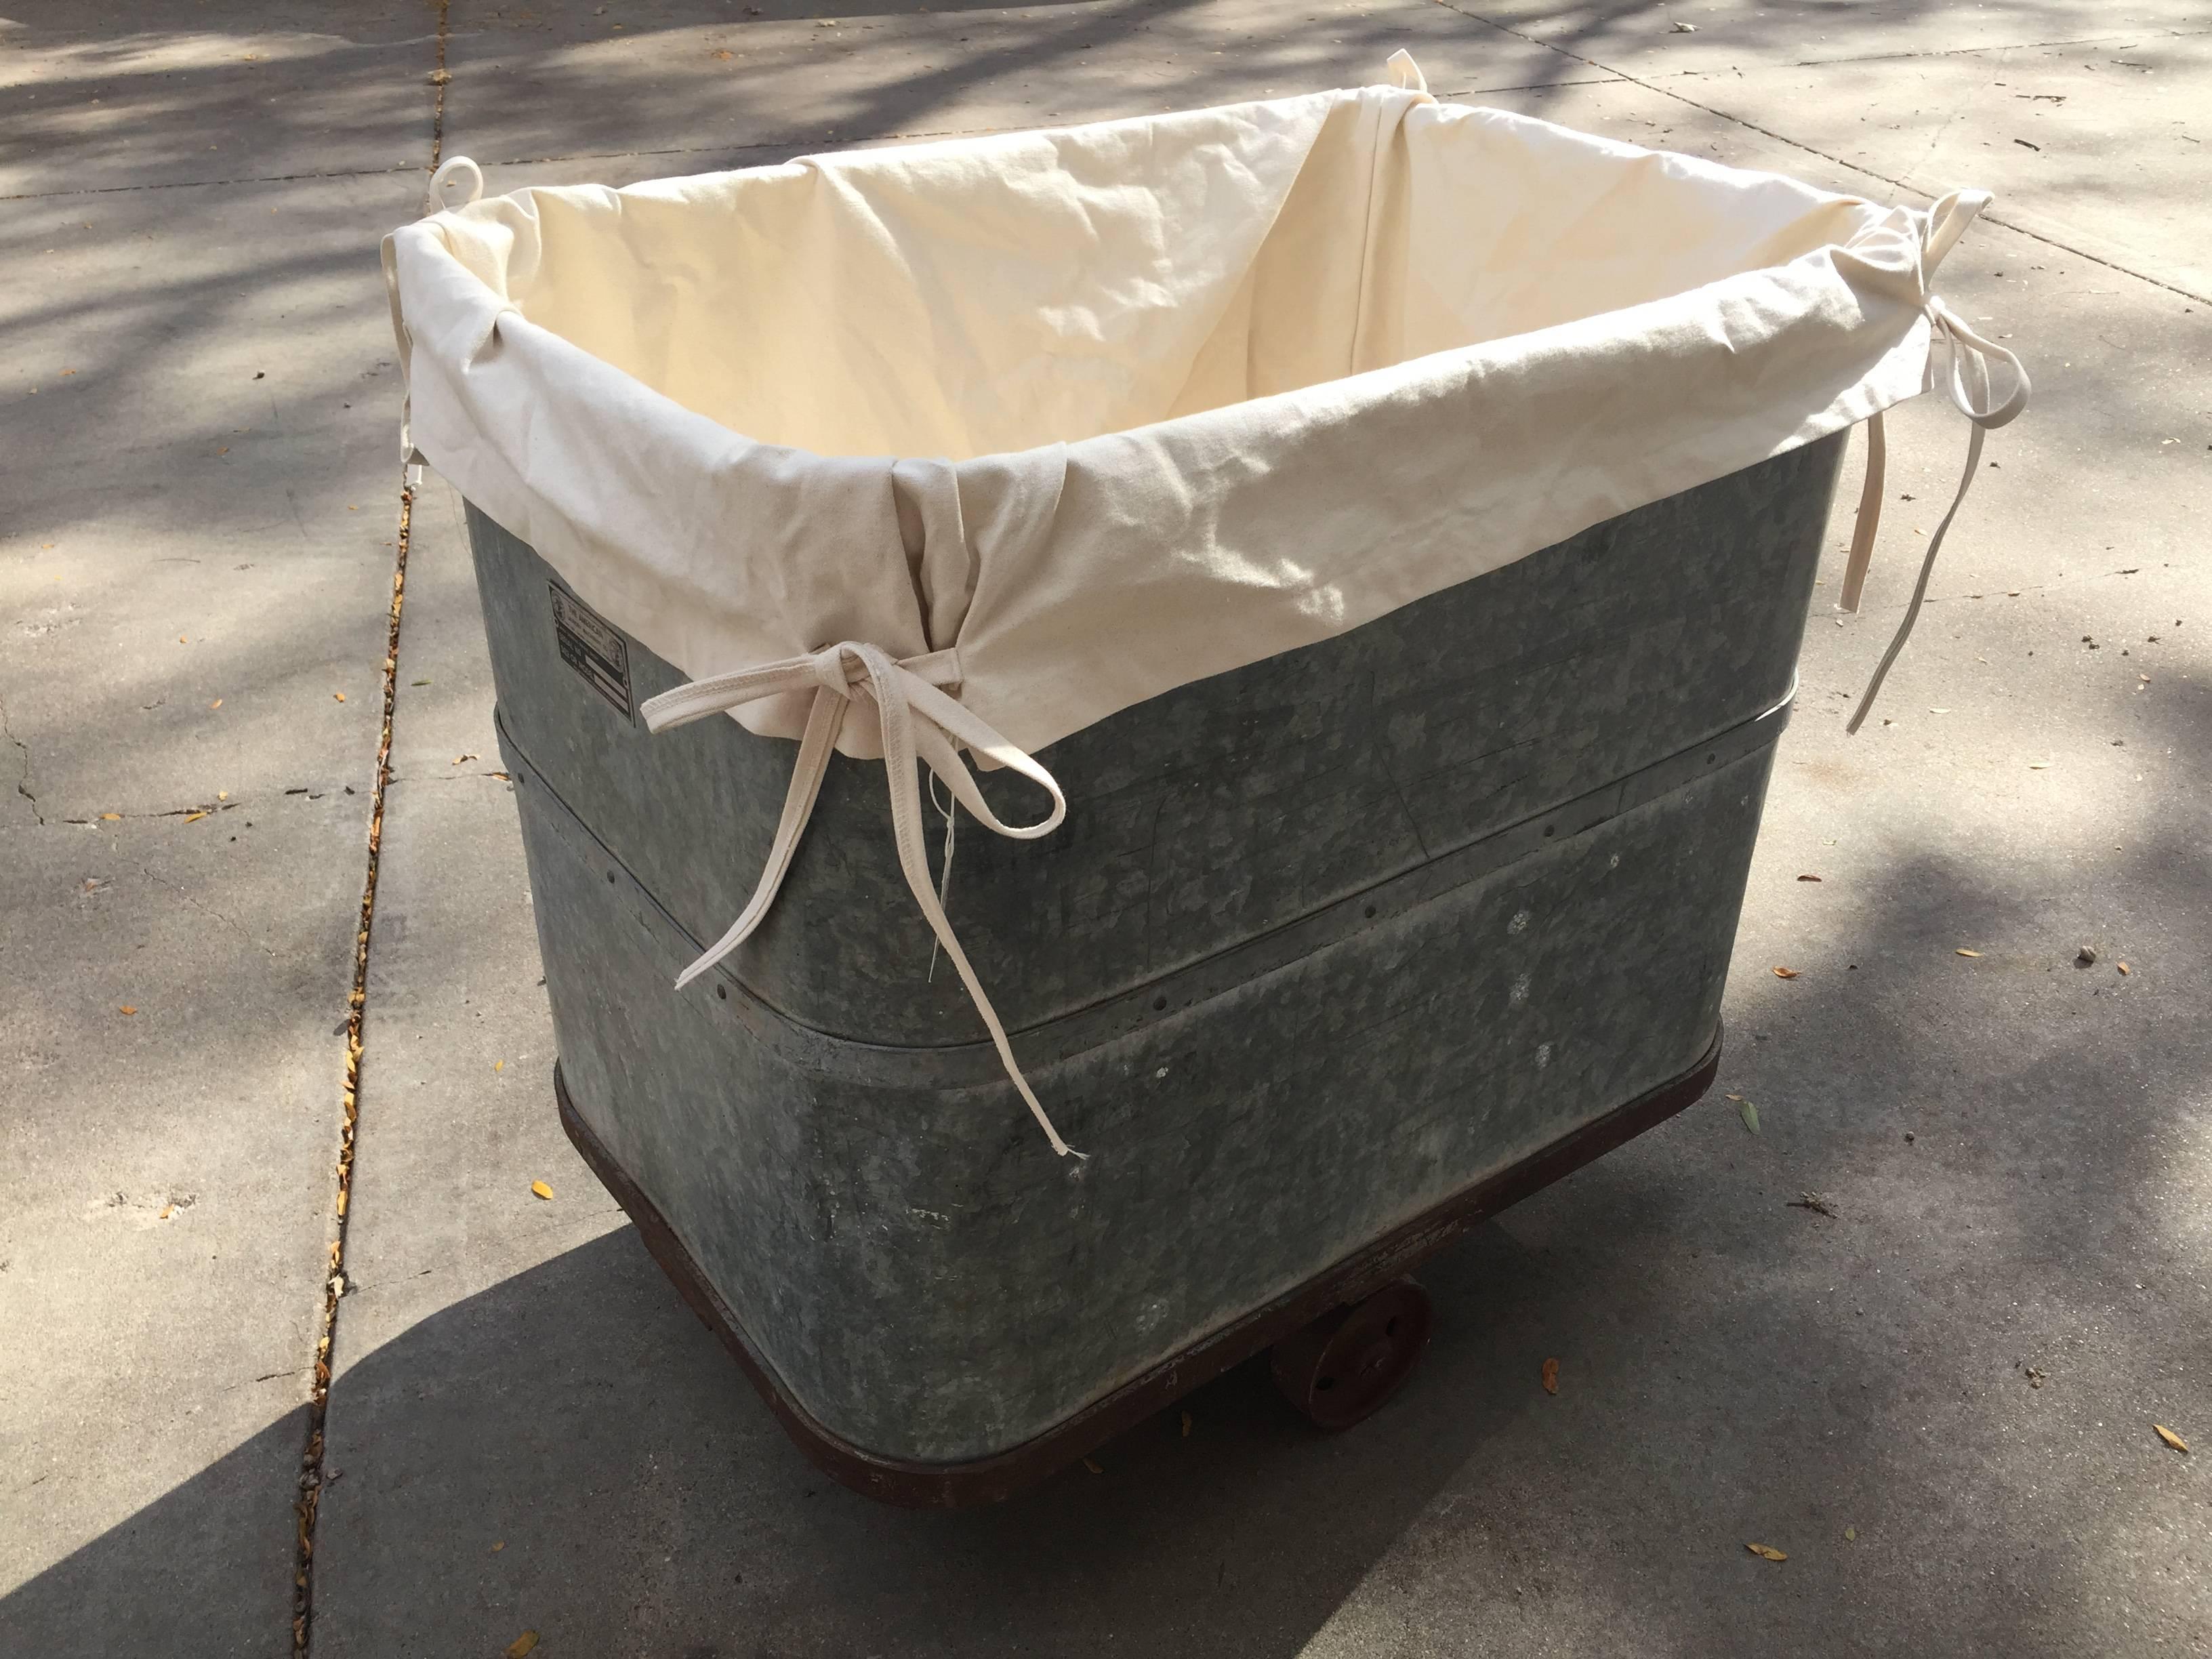 Vintage industrial laundry cart with new liner and working original wheels.